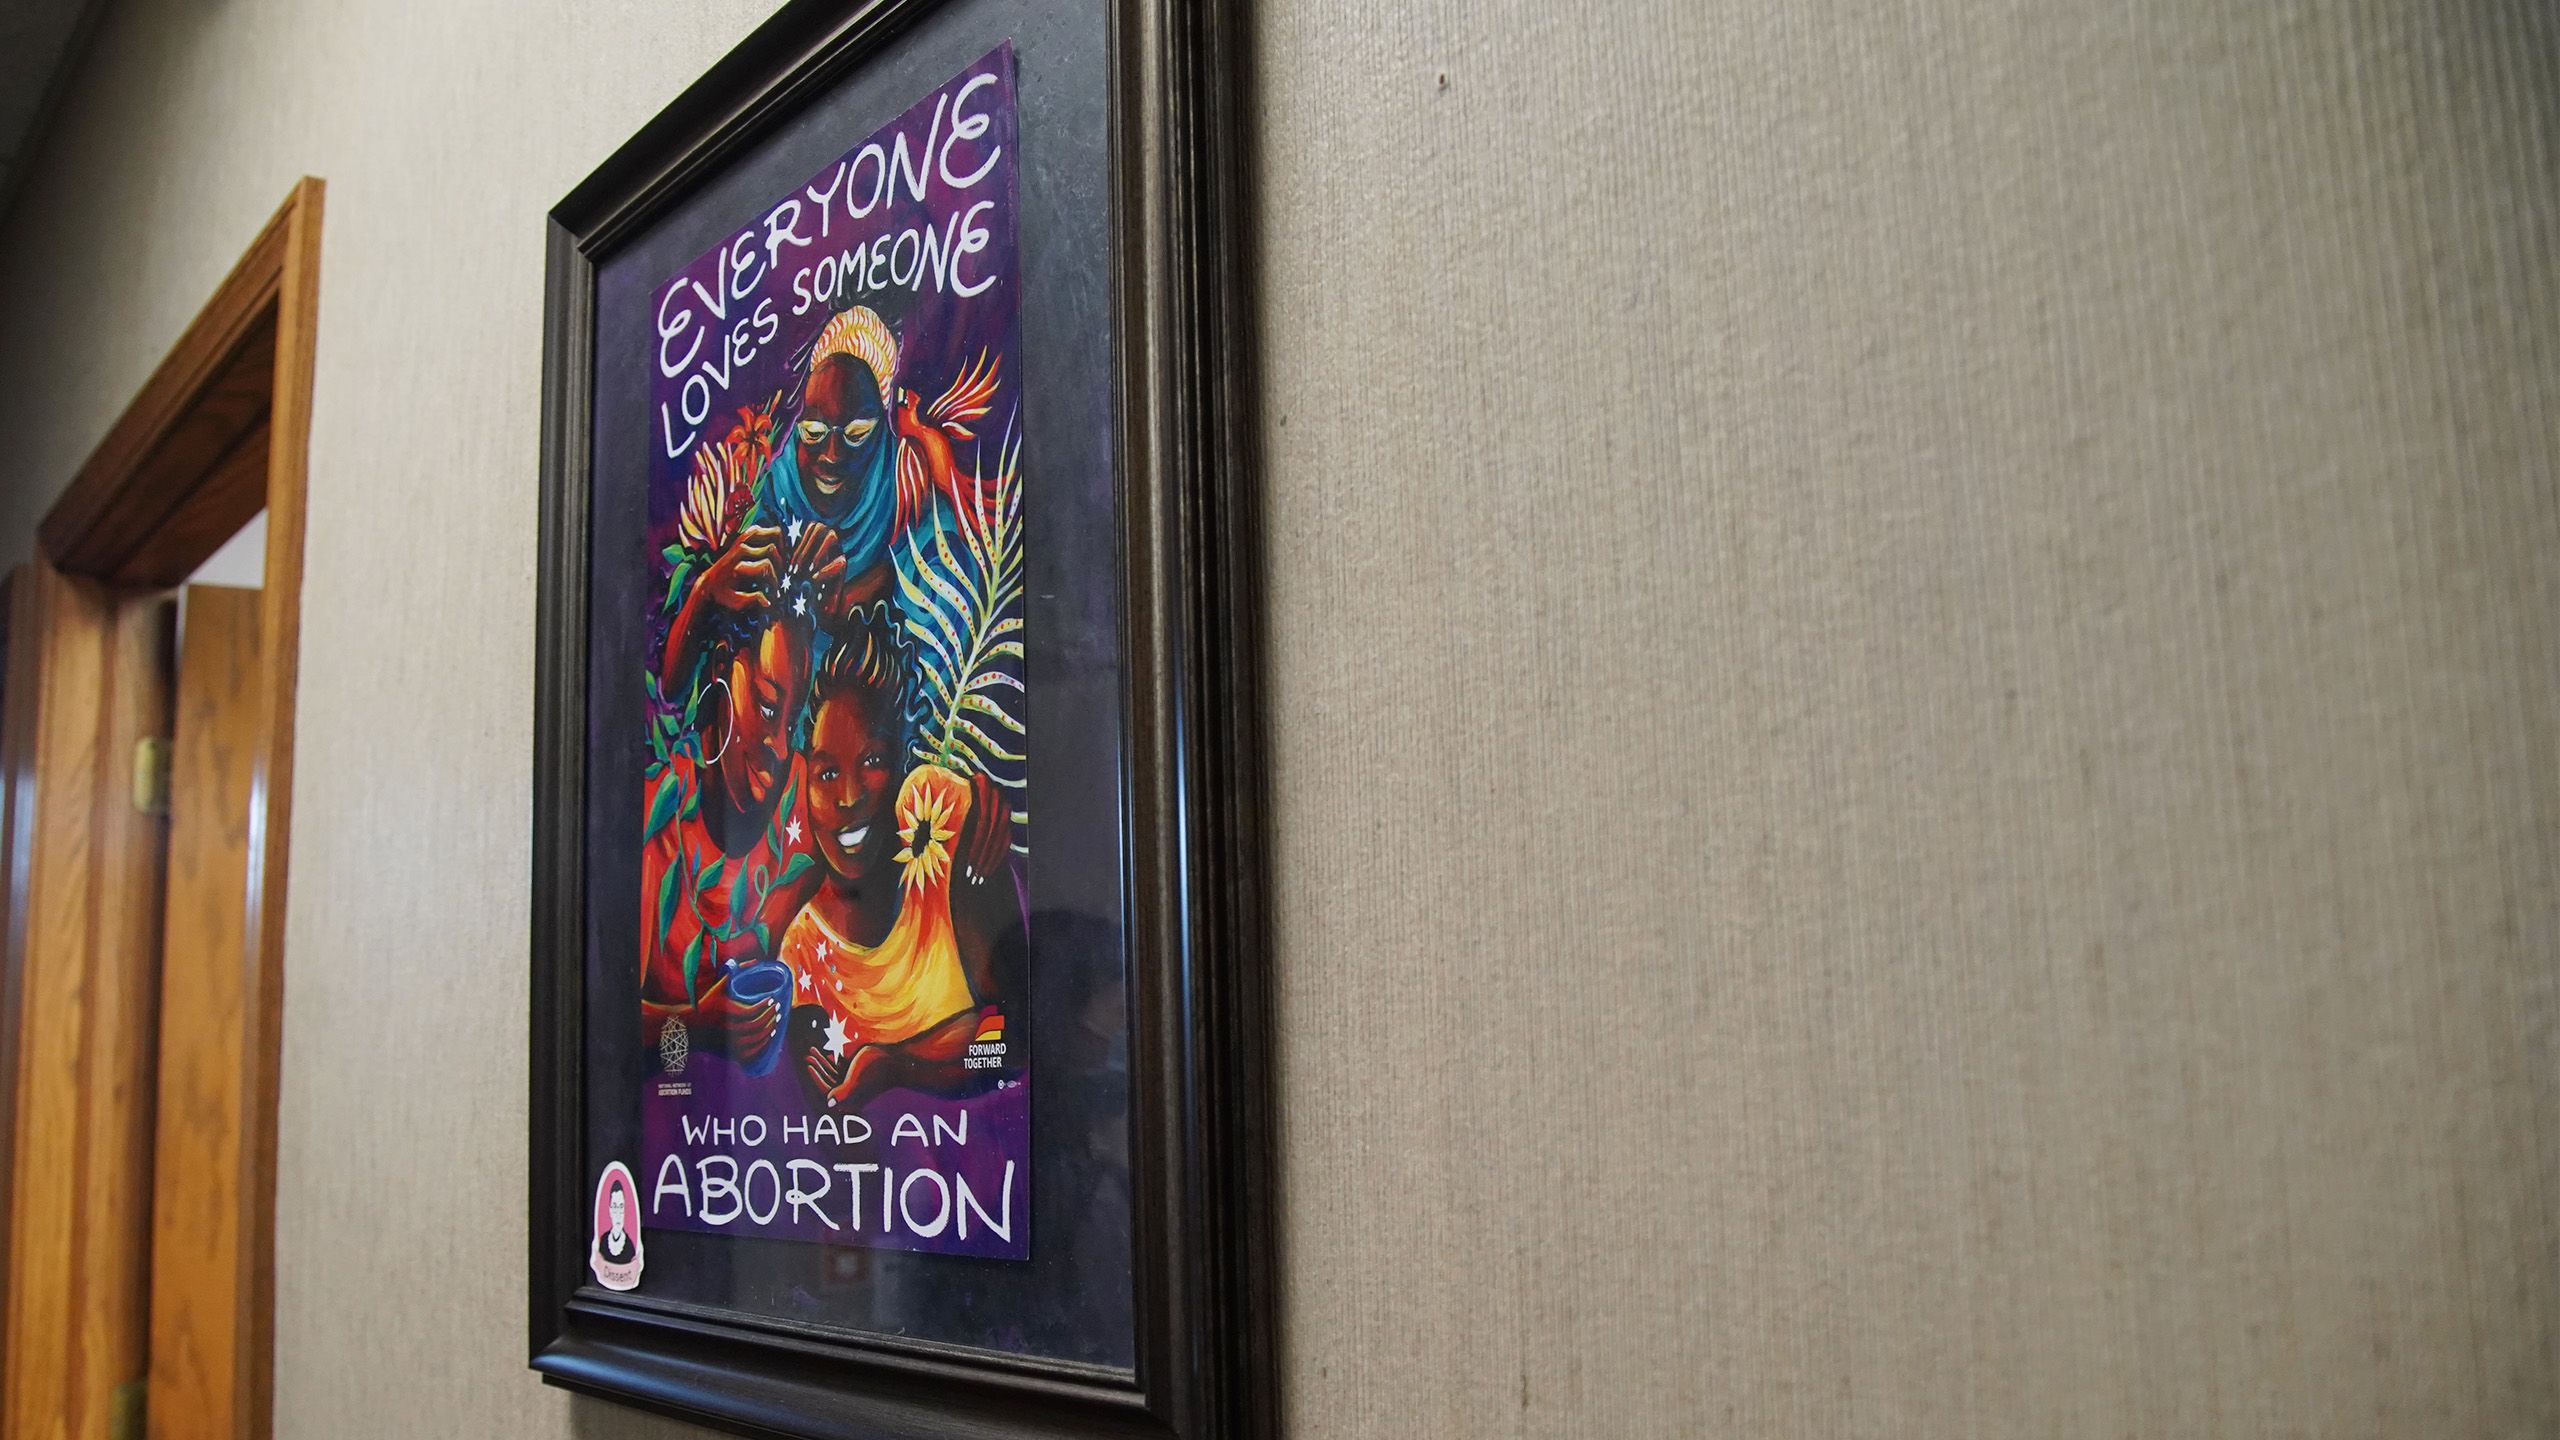 Artwork reading, "Everyone loves someone who had an abortion," hangs inside the Northeast Ohio Women's Center in Cuyahoga Falls.